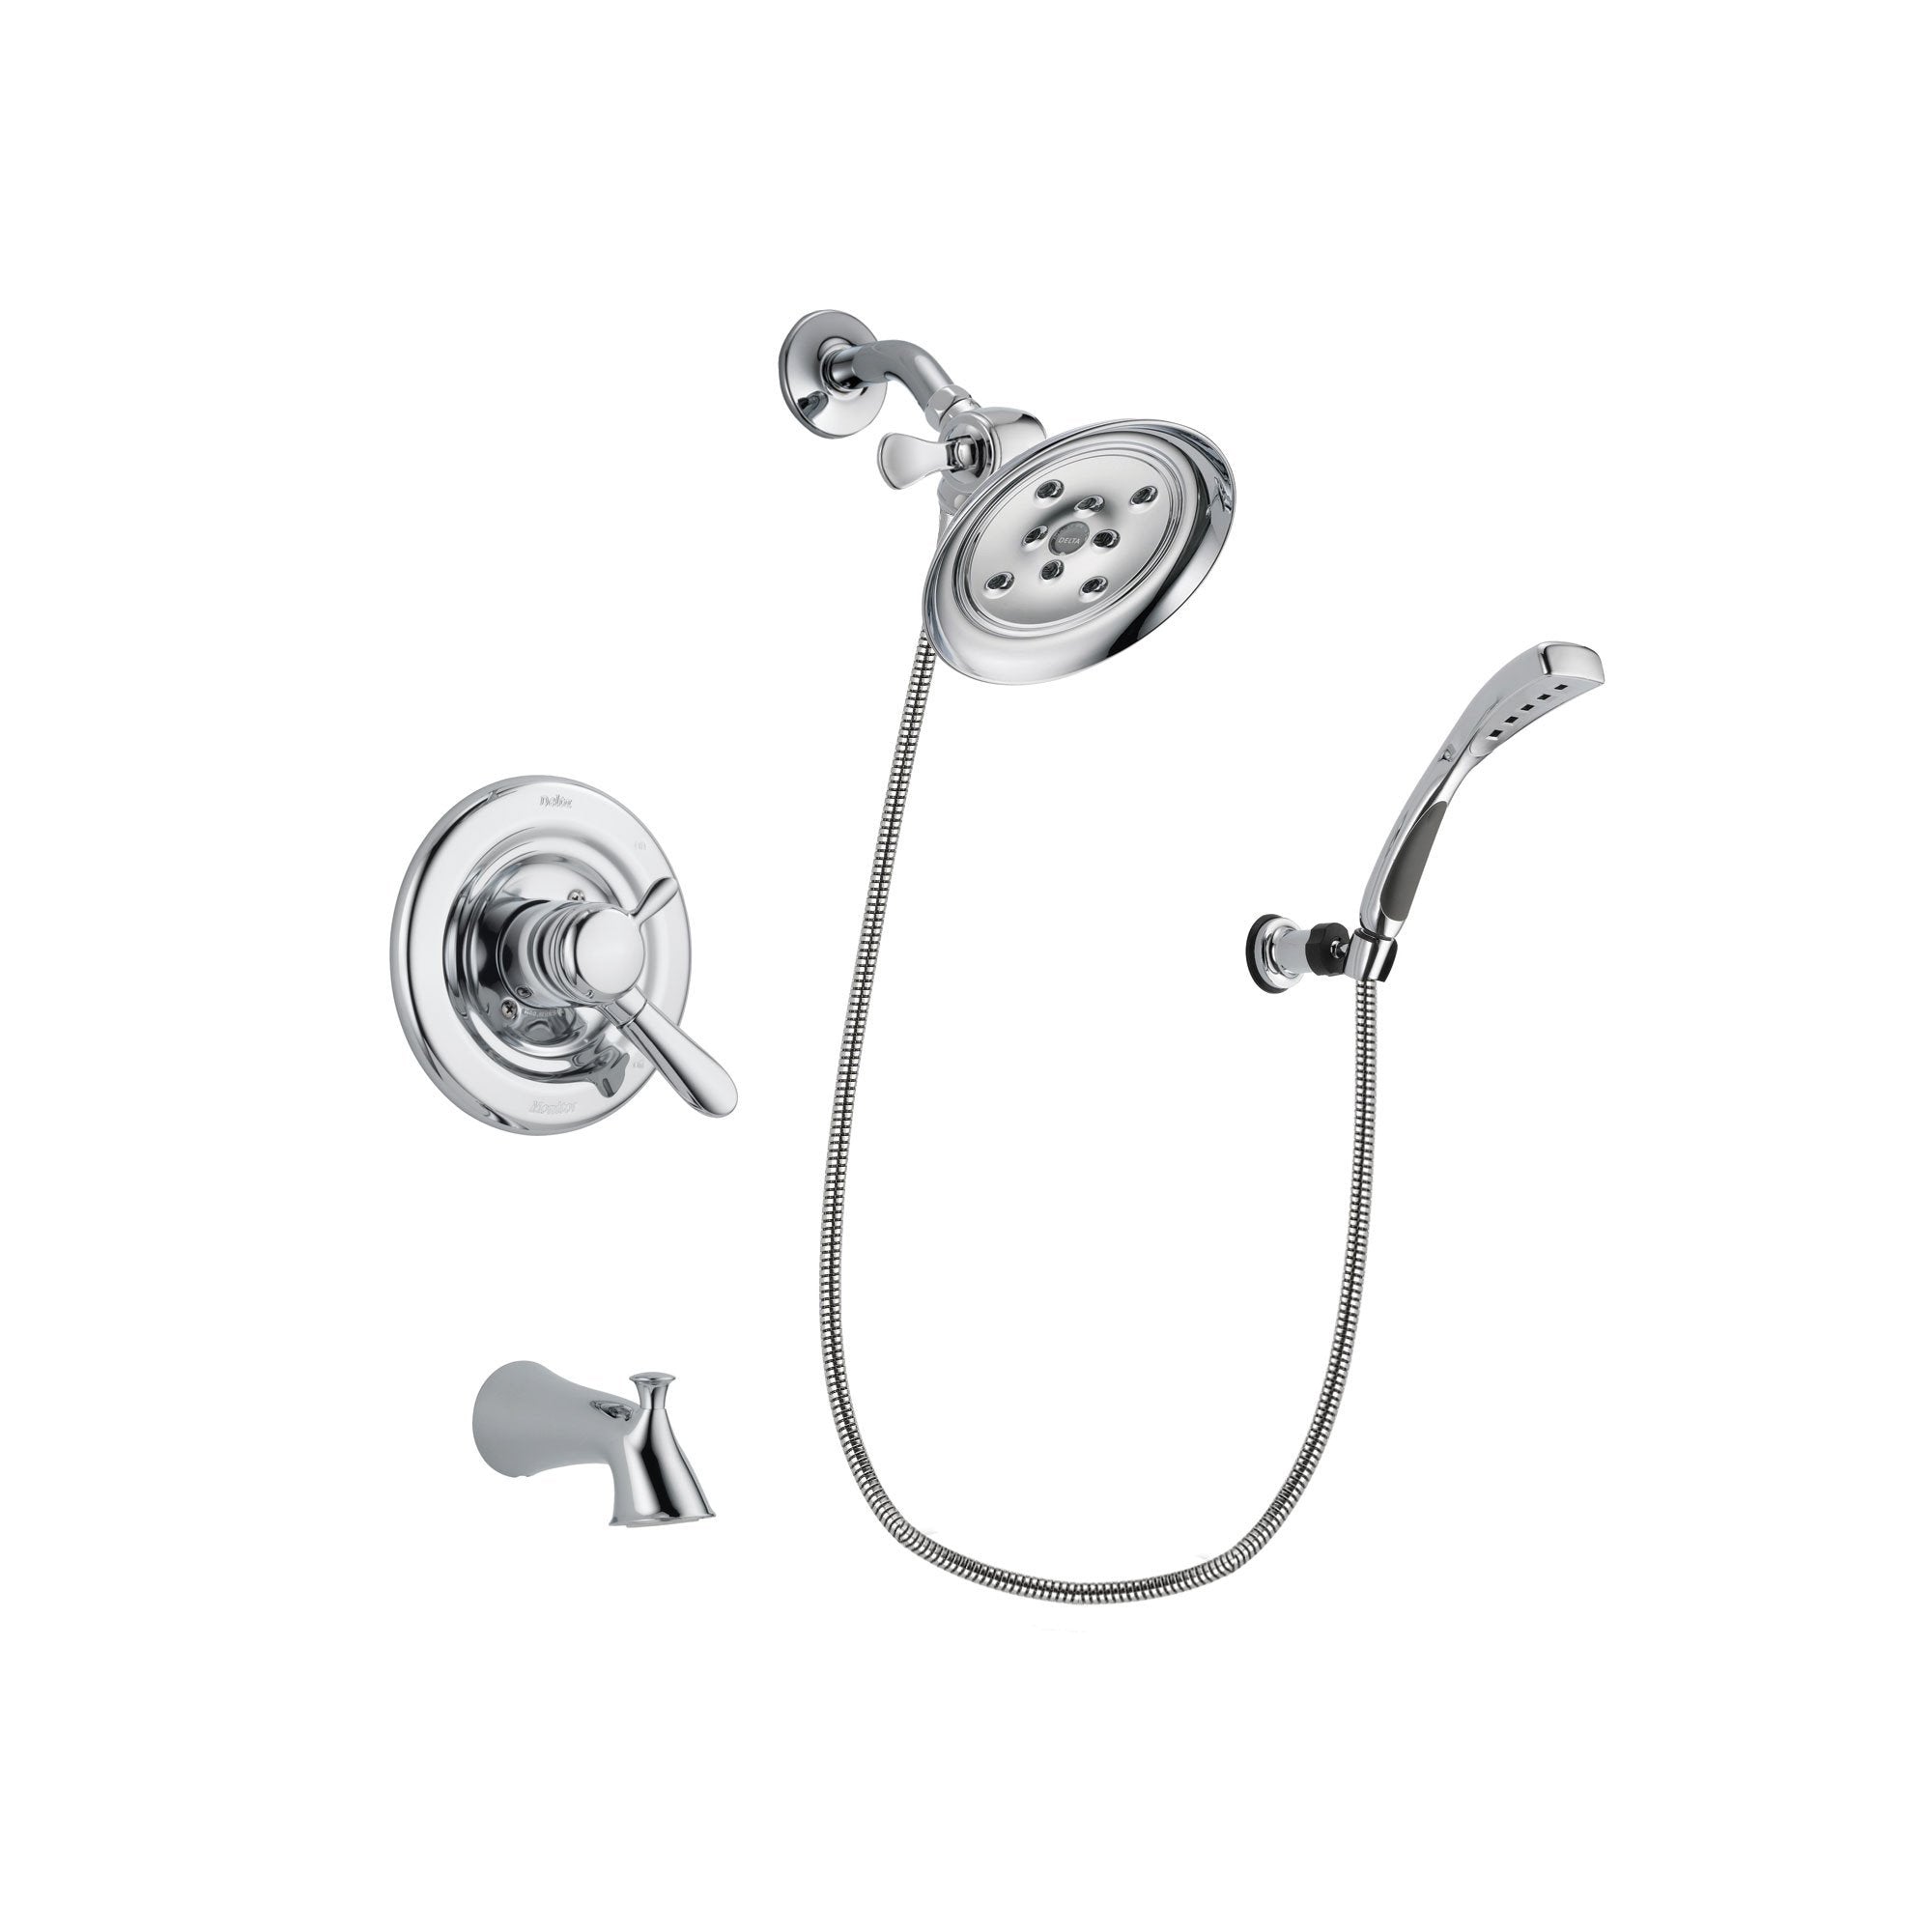 Delta Lahara Chrome Finish Dual Control Tub and Shower Faucet System Package with Large Rain Showerhead and Wall-Mount Bracket with Handheld Shower Spray Includes Rough-in Valve and Tub Spout DSP1057V